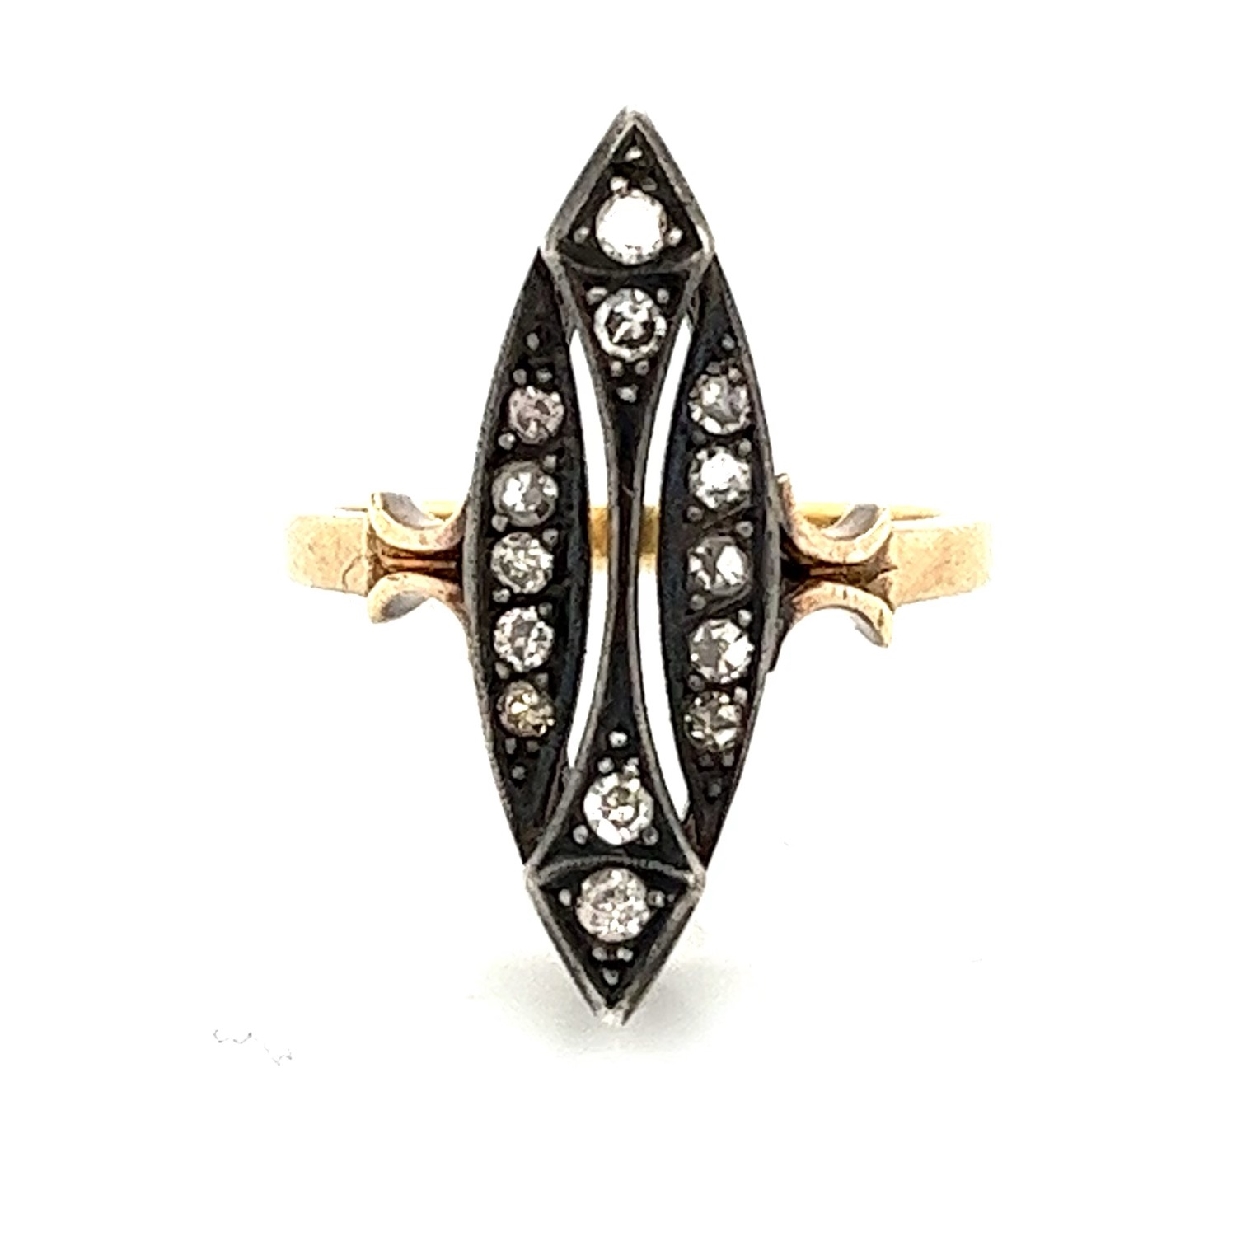 18K Yellow Gold and Silver Antique Victorian Ring with Filigree.

Size 6.5 